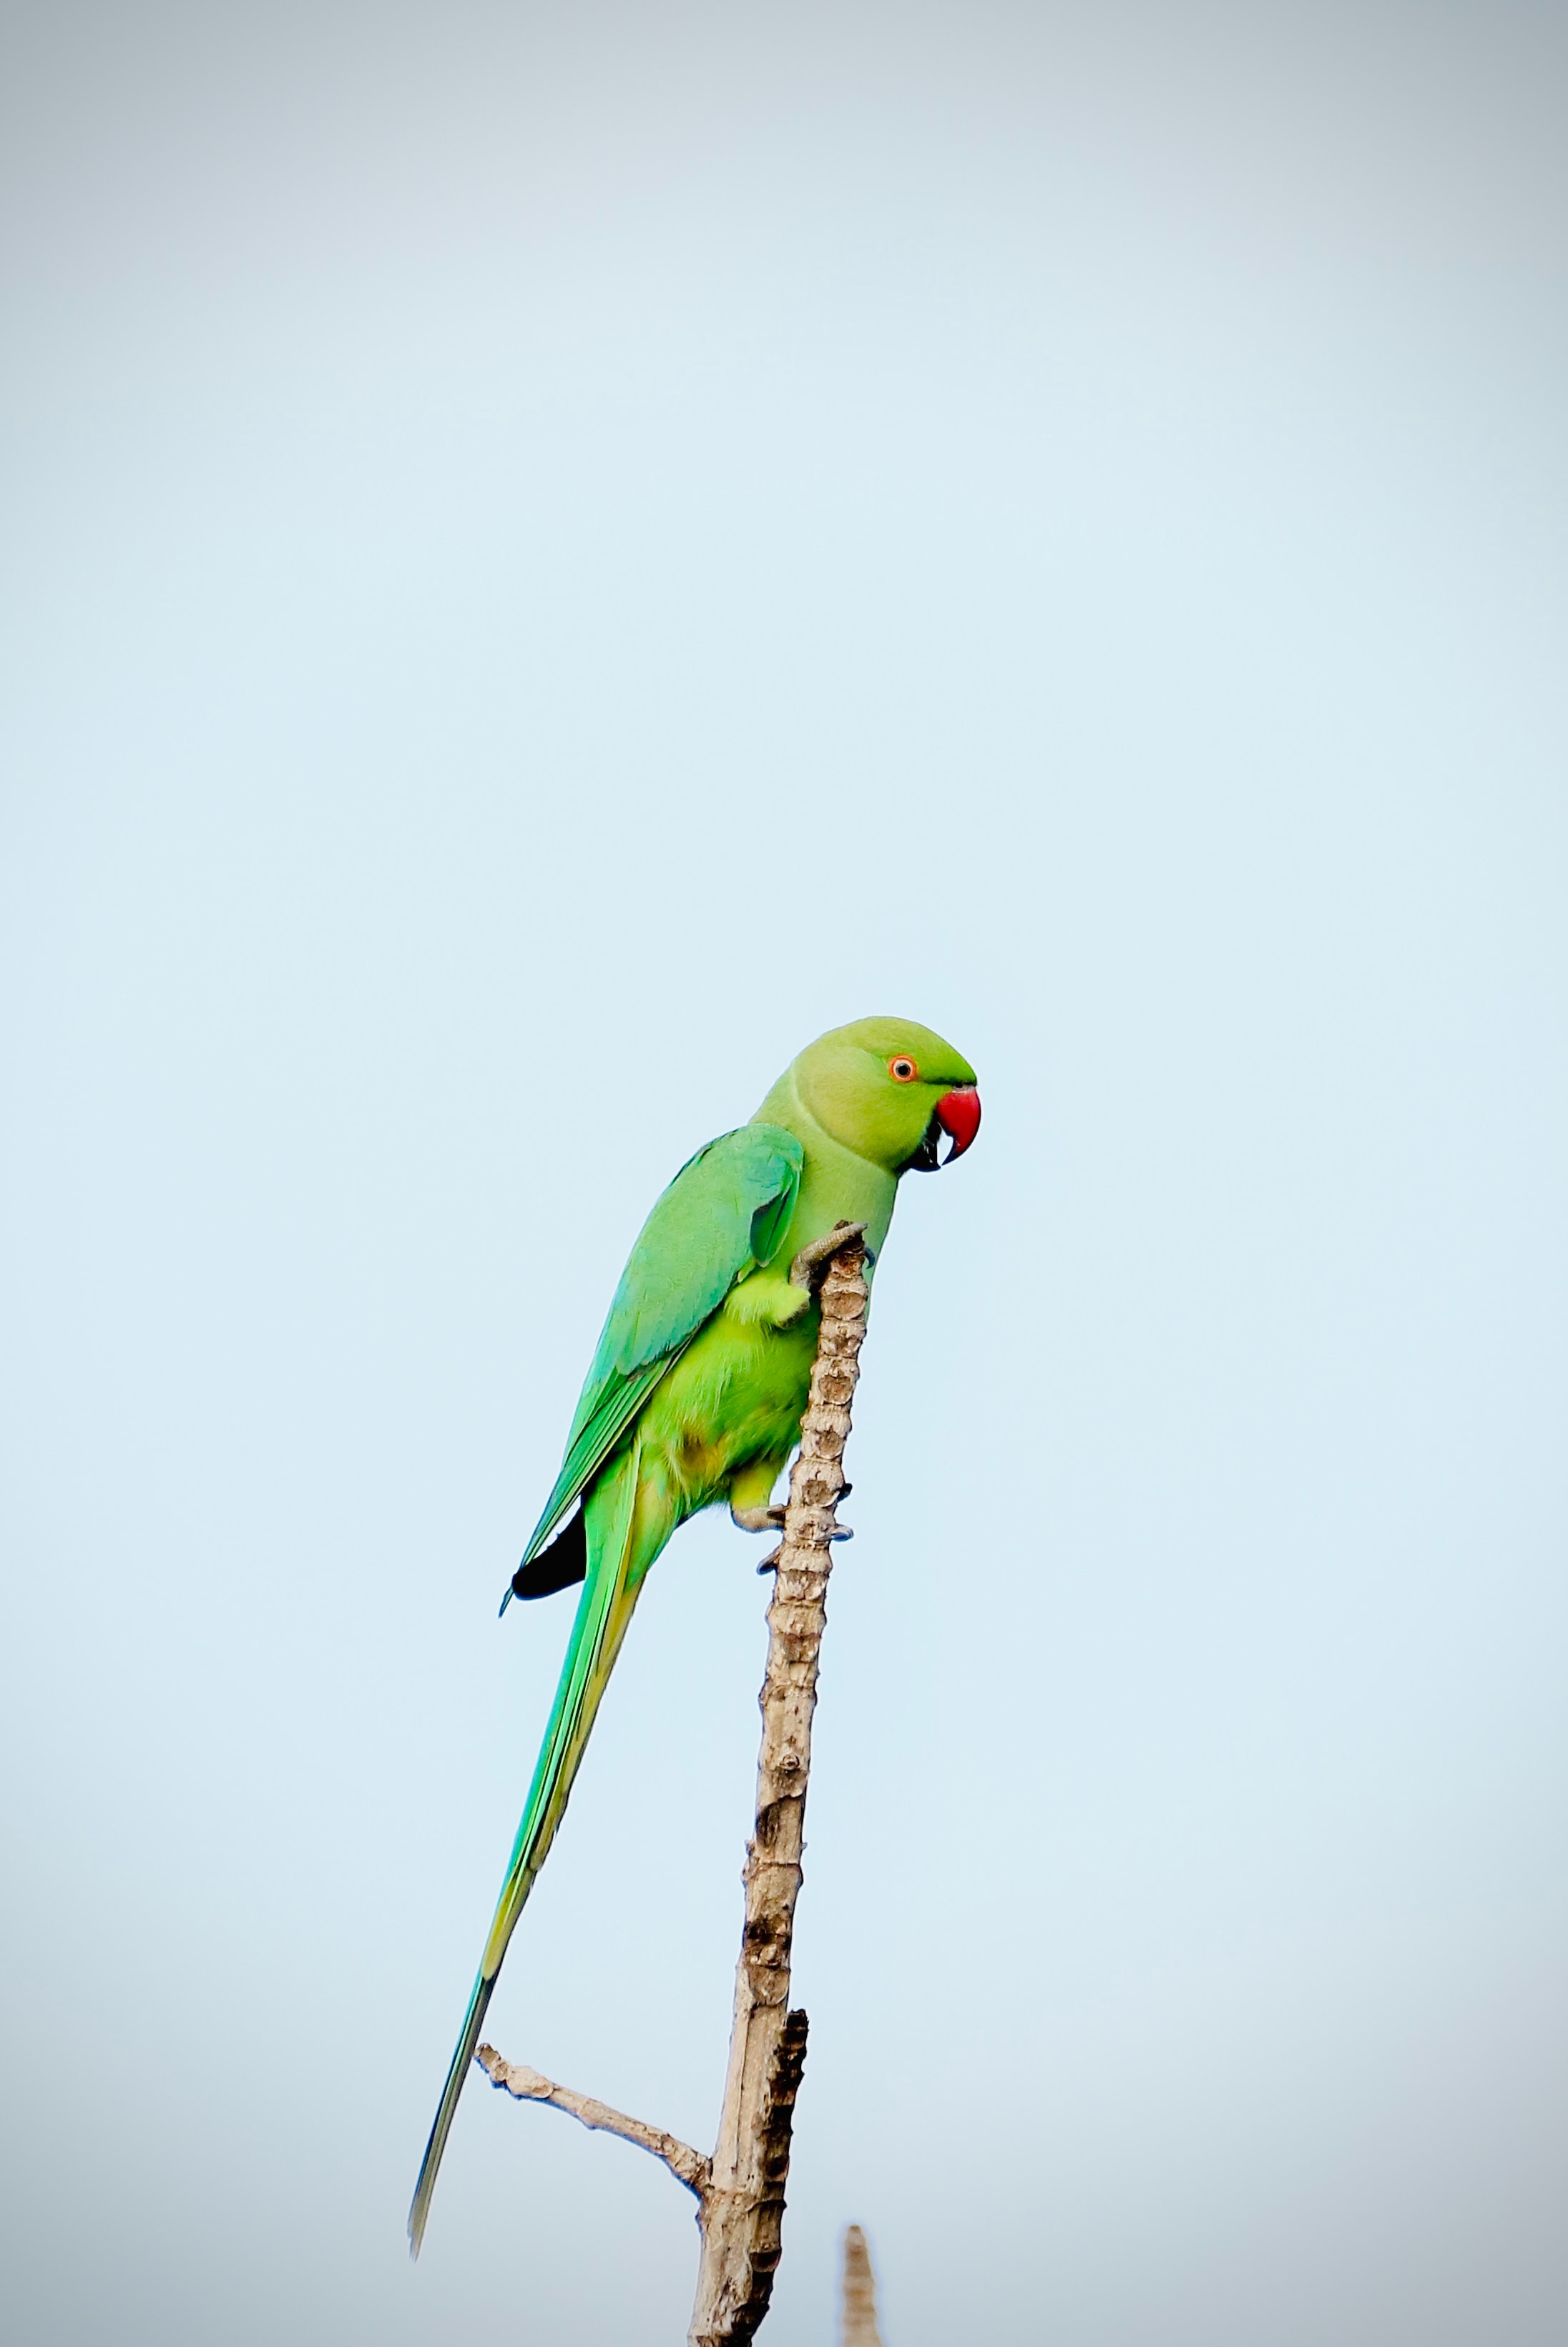 Mobile wallpaper: Parrots, Animals, Branch, Bird, Bright, 108875 download  the picture for free.